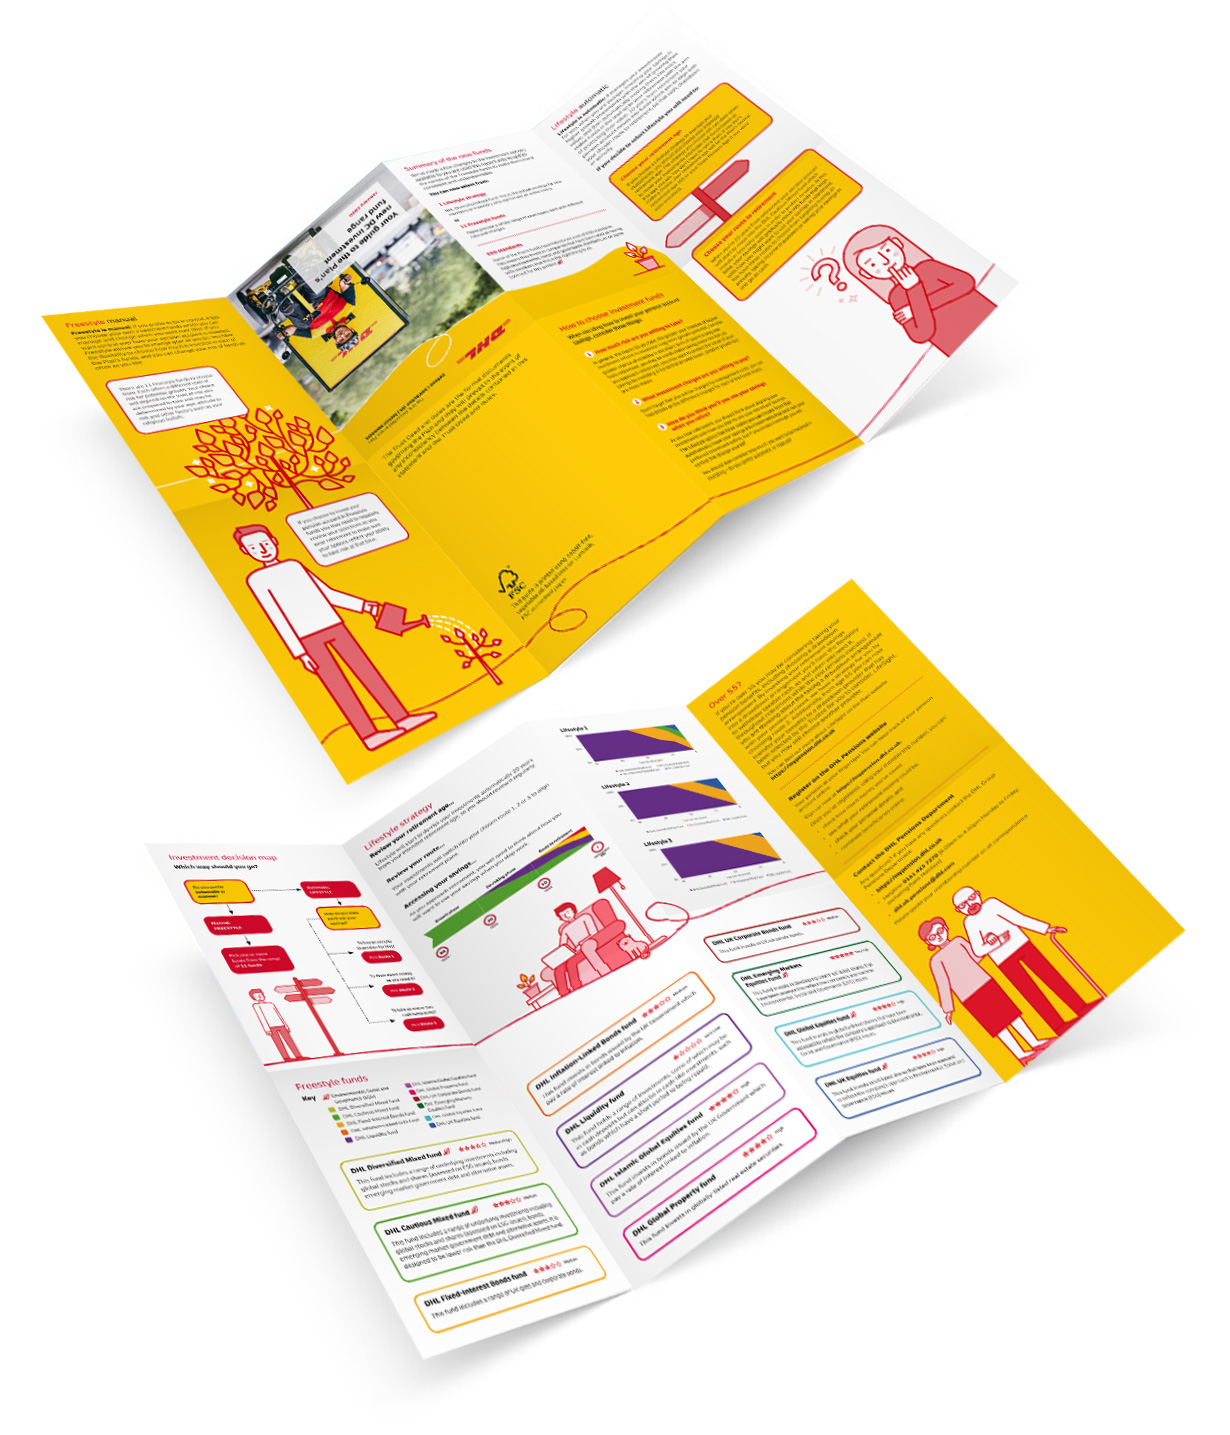 DHL first draft fold out leaflet, front and back